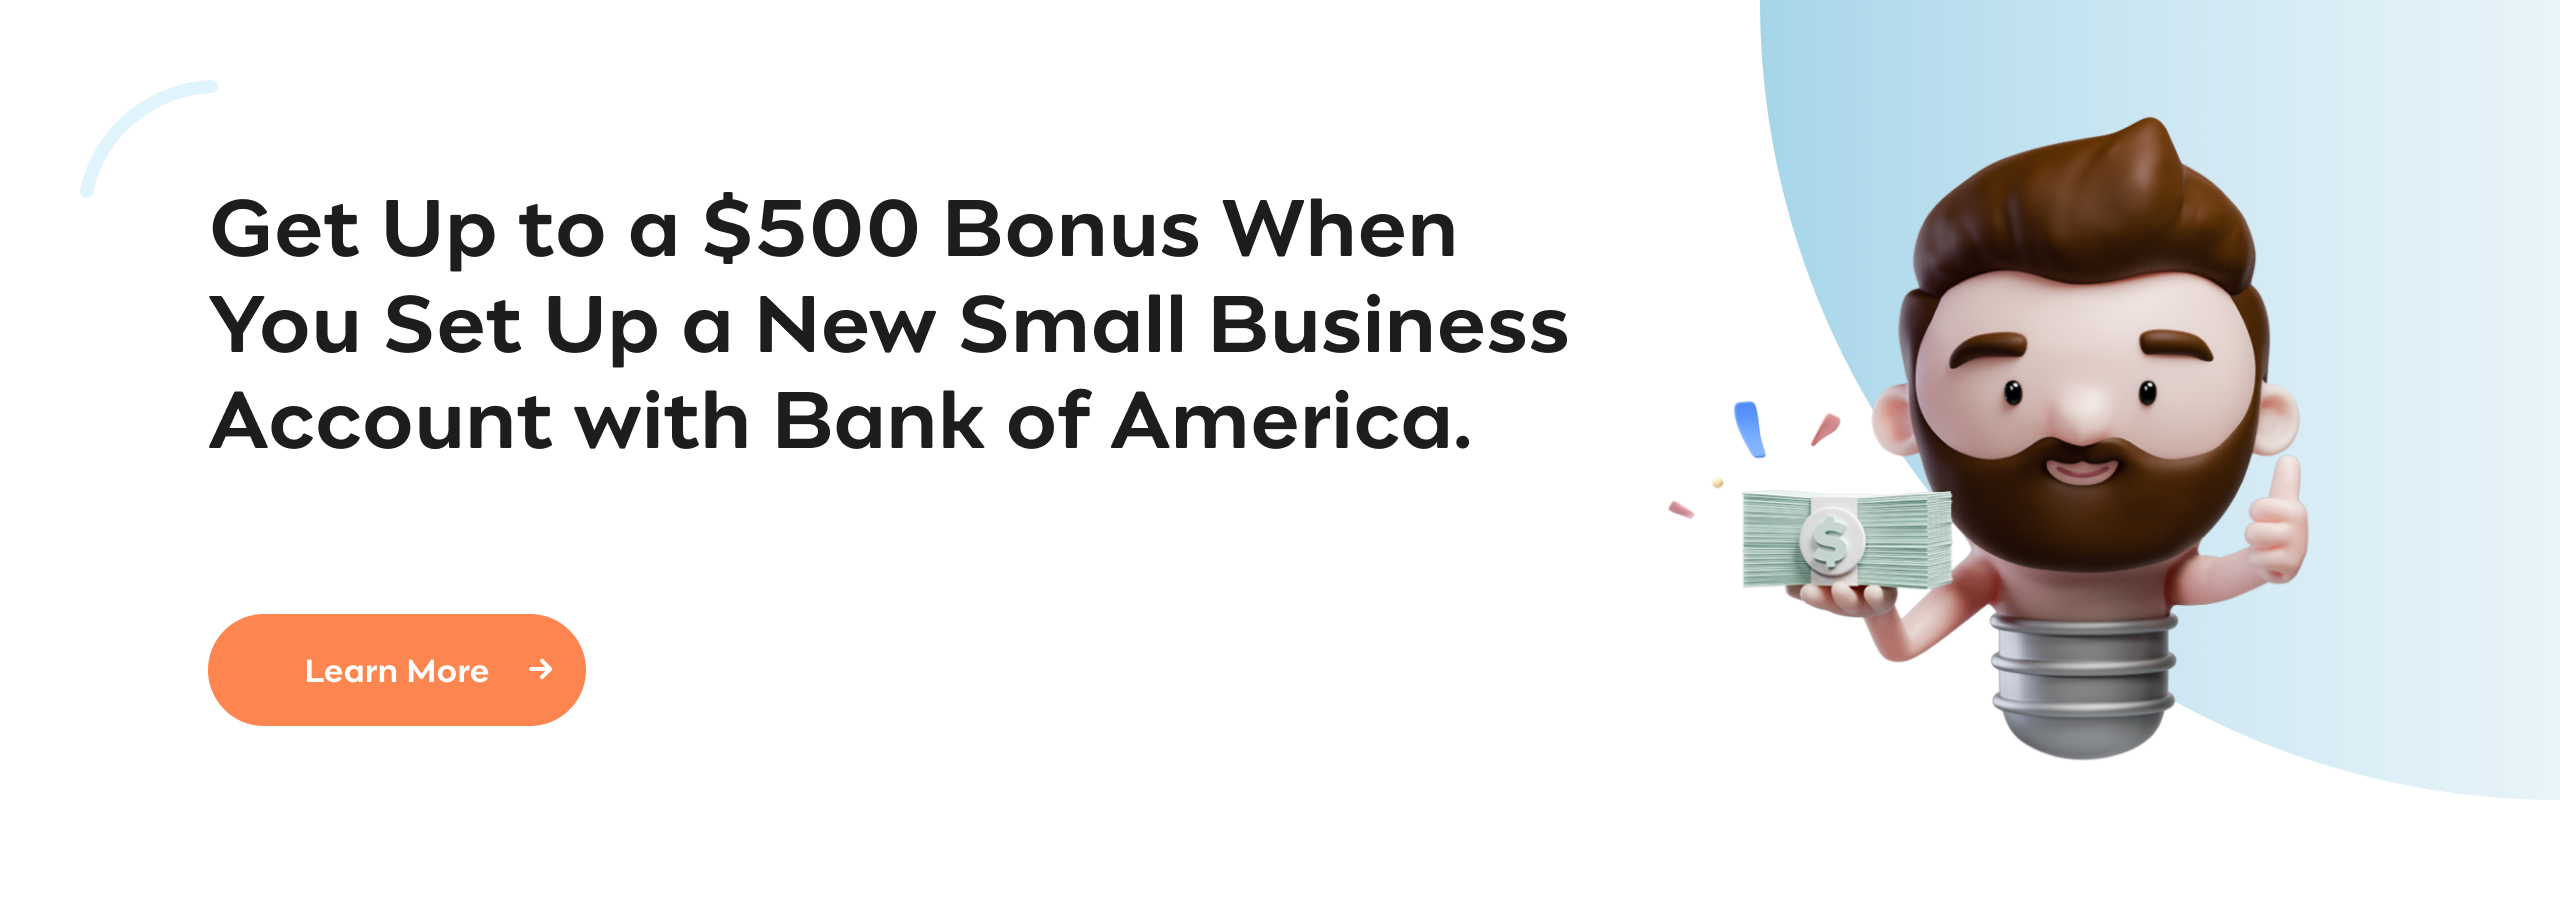 Get Up to a $500 Bonus When You Set Up a New Small Business Account with Bank of America.